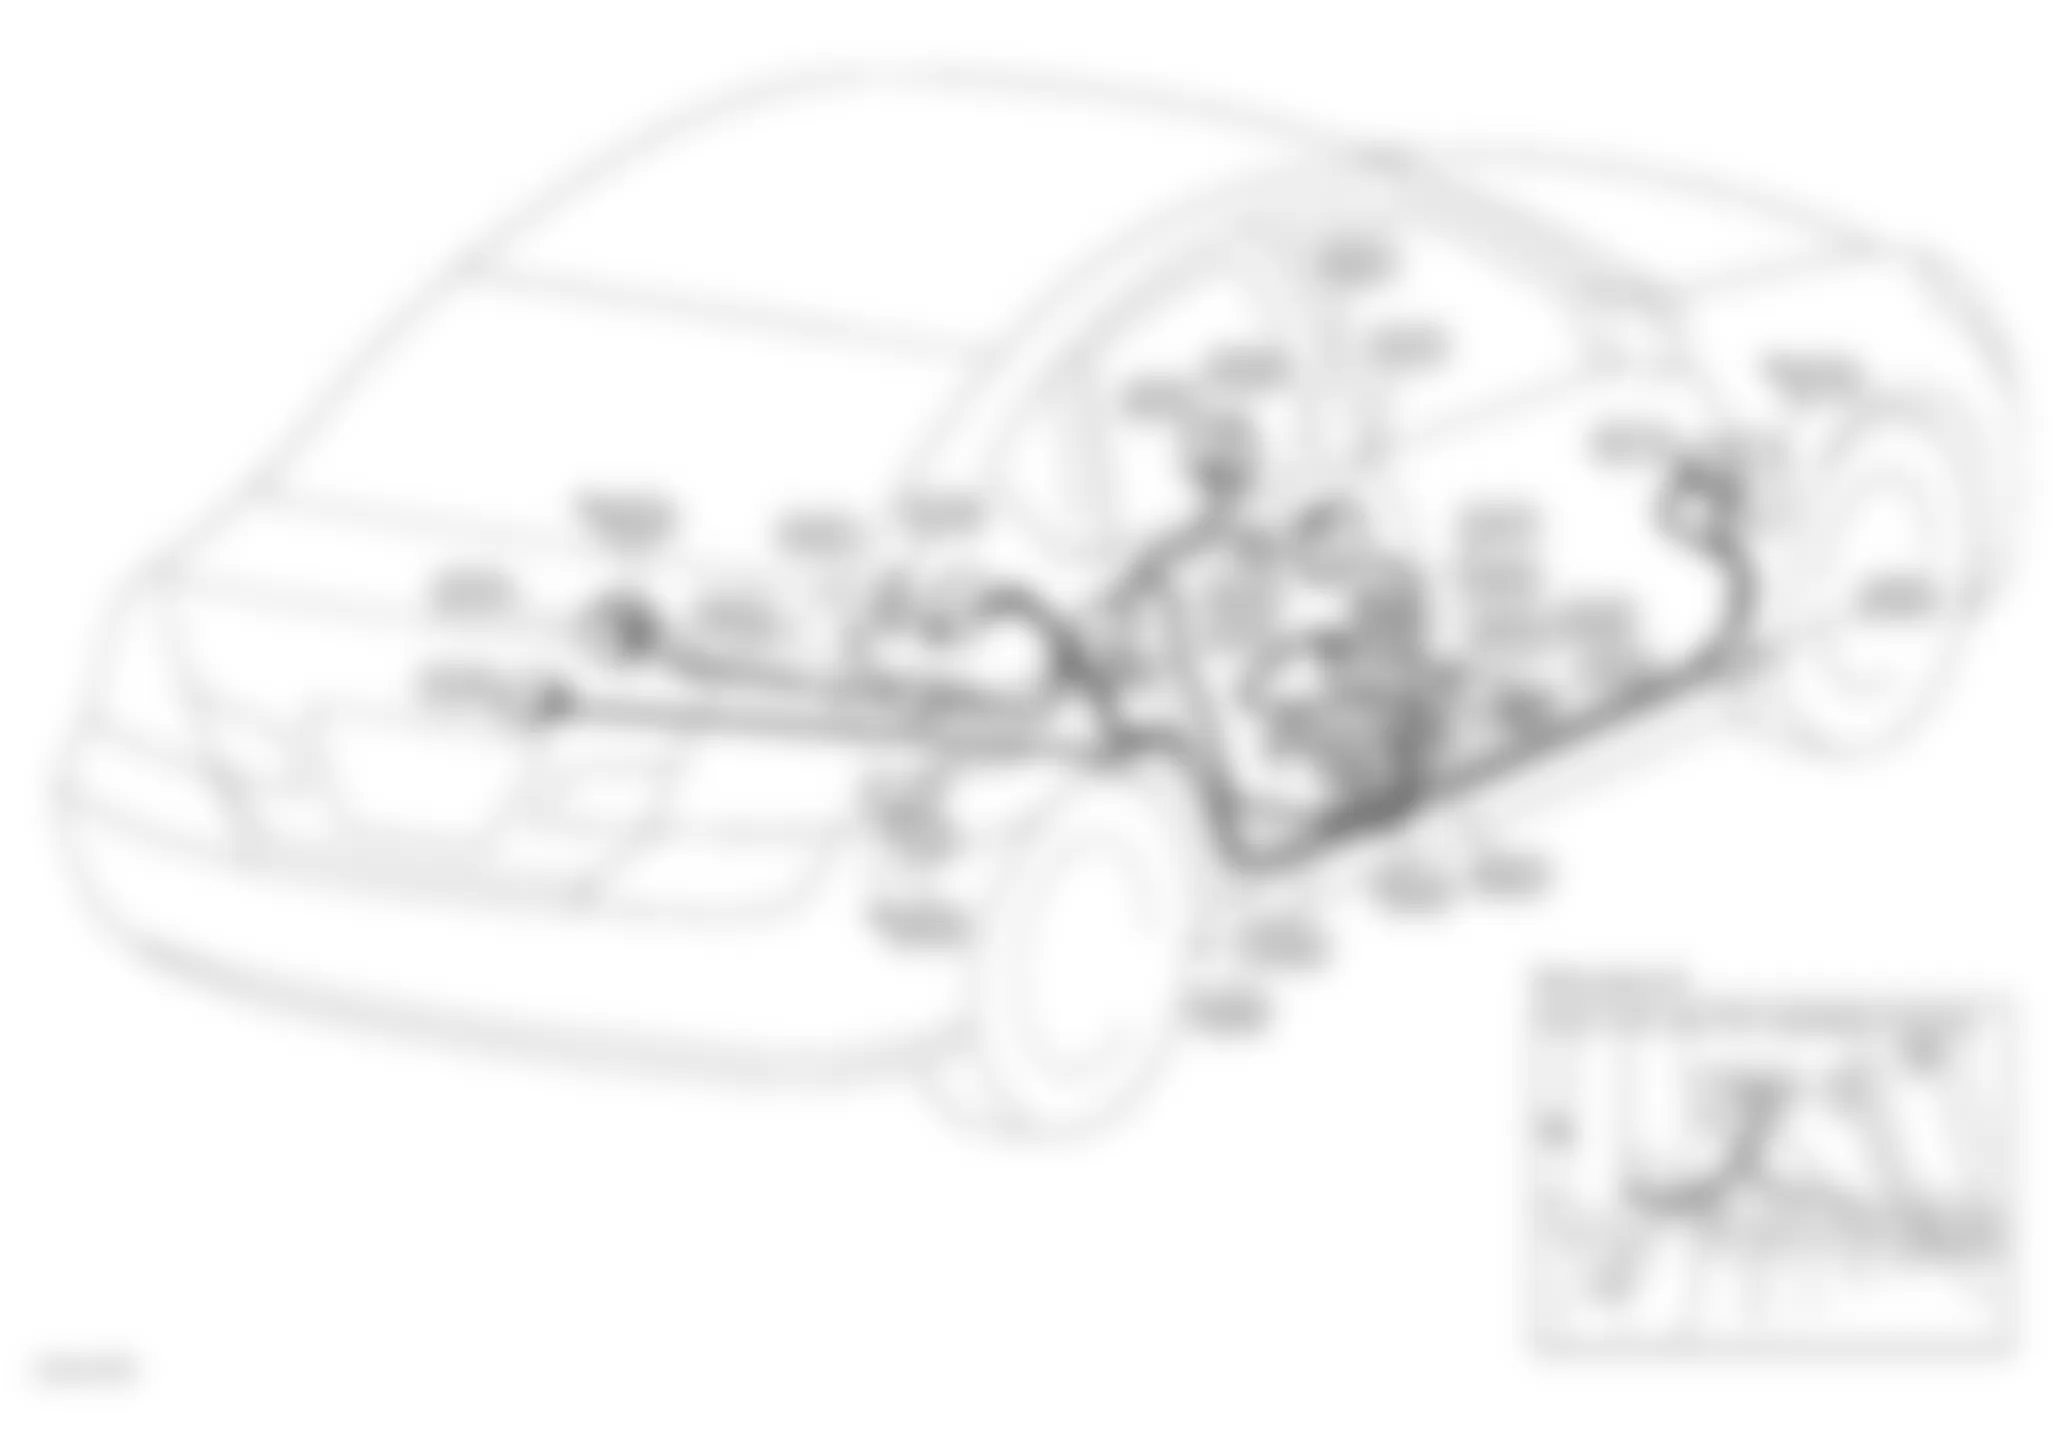 Infiniti M35 2009 - Component Locations -  Right Side Of Vehicle